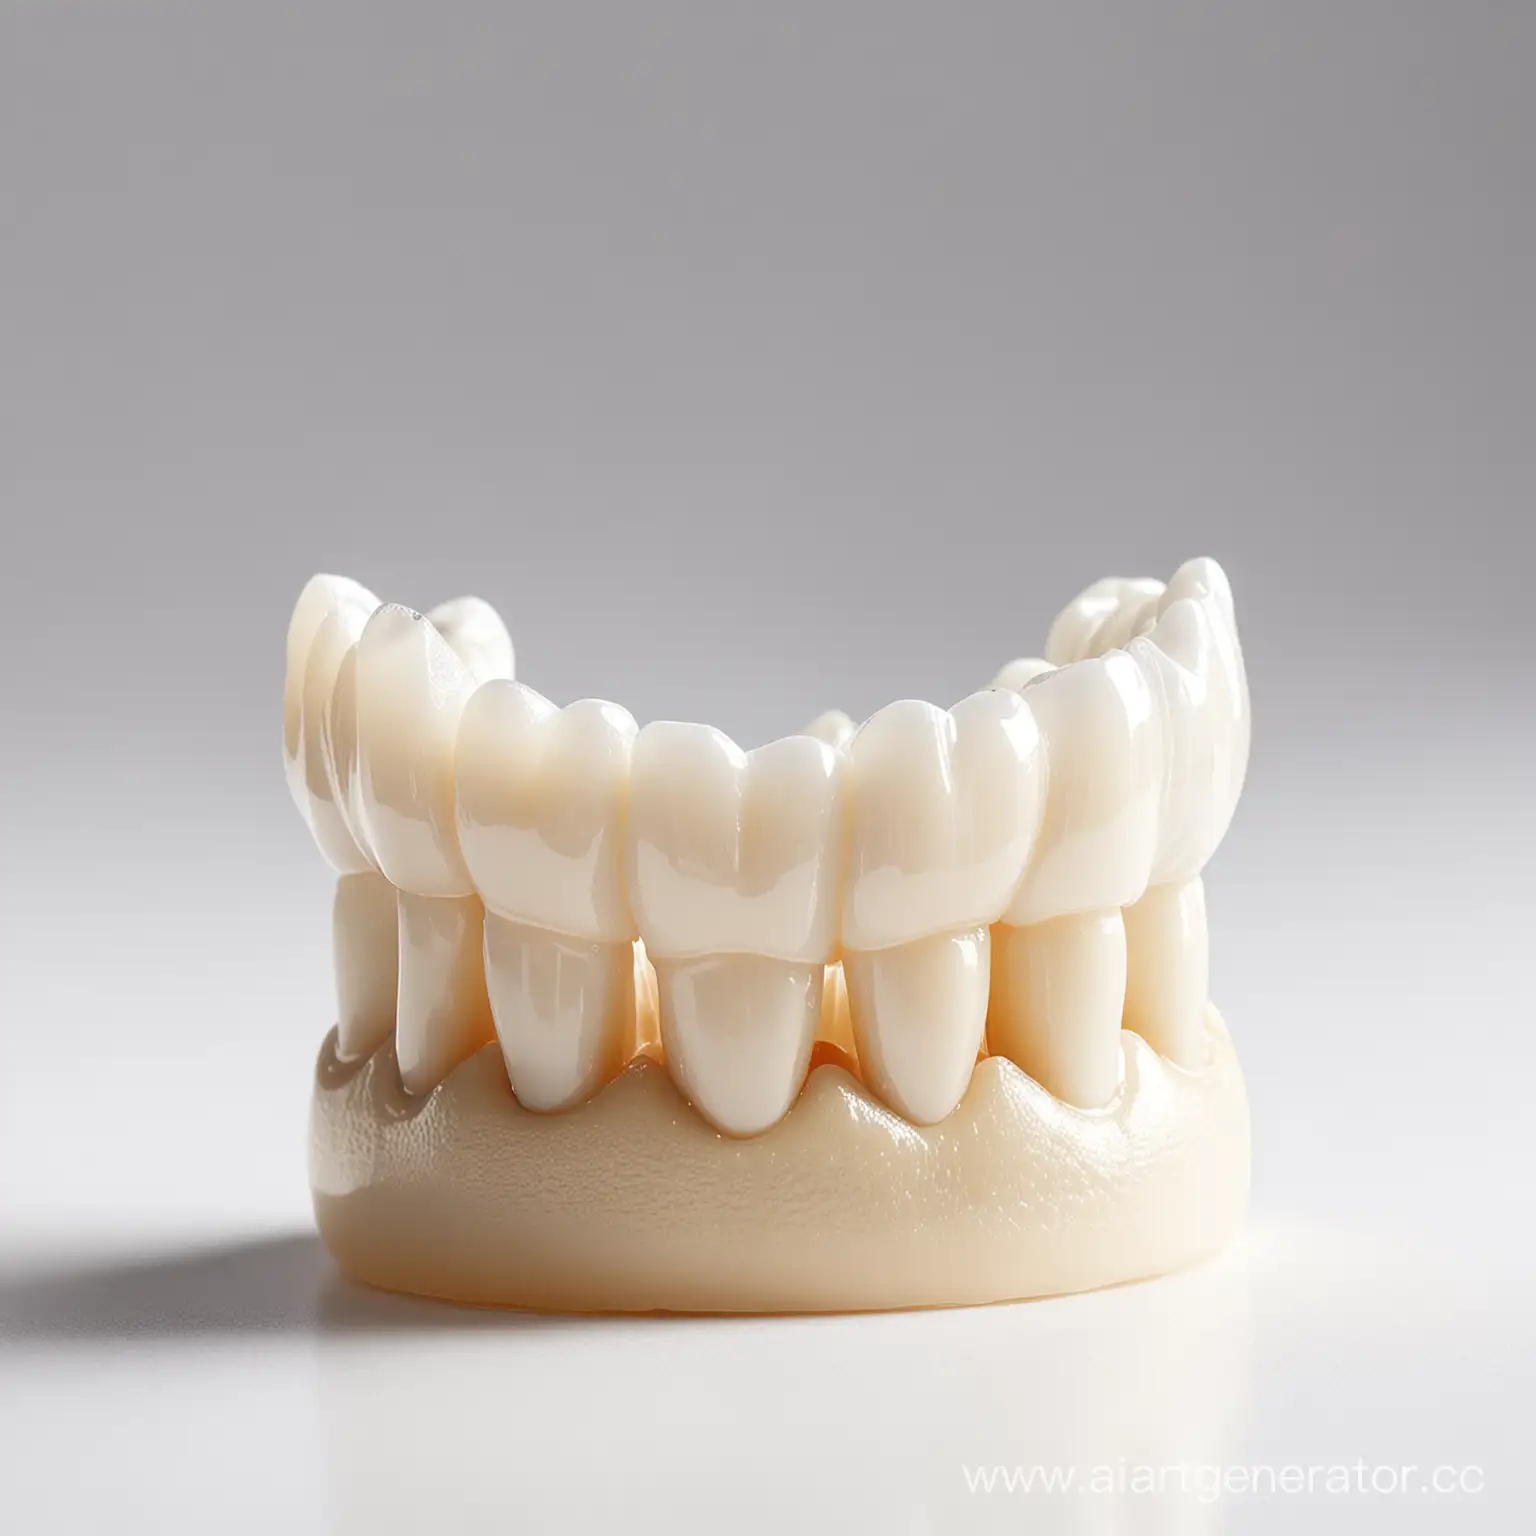 Shiny-Dental-Crown-on-Clean-White-Background